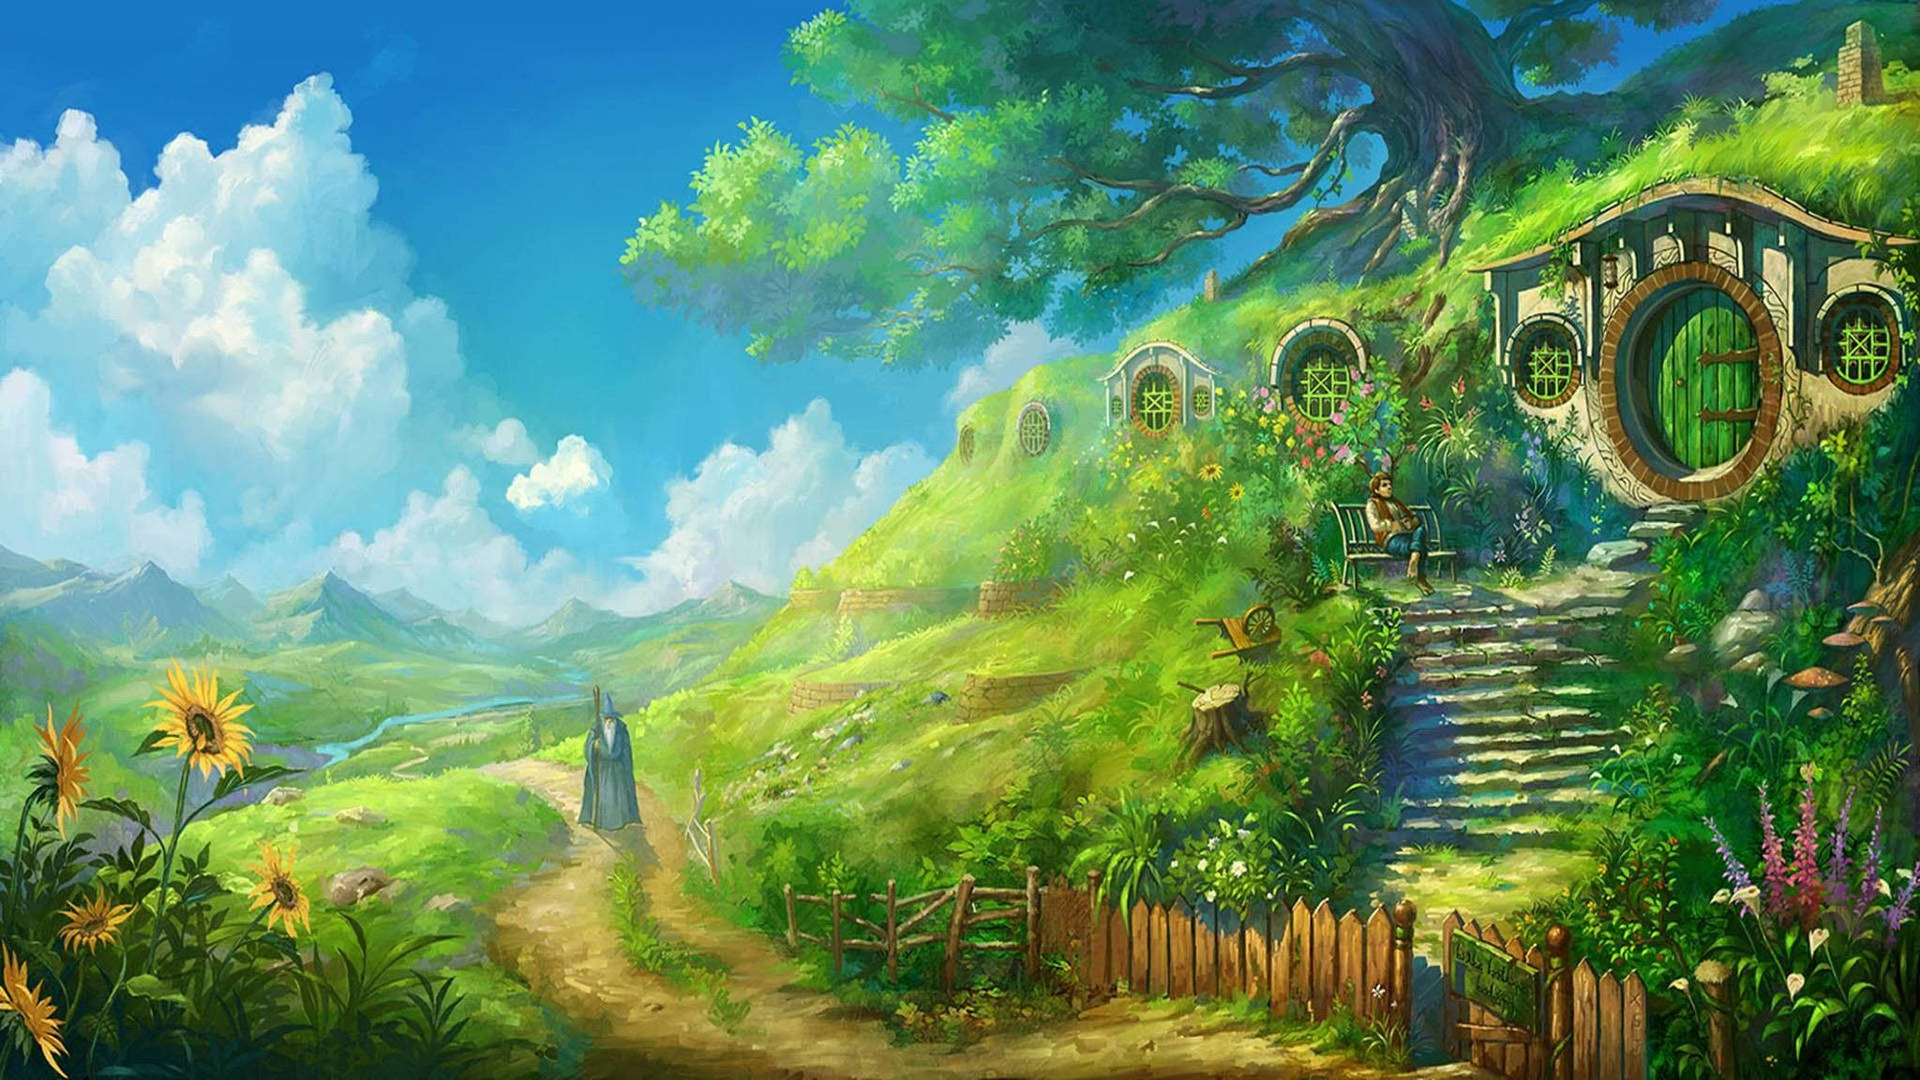 Journey to an enchanted world with Studio Ghibli Wallpaper